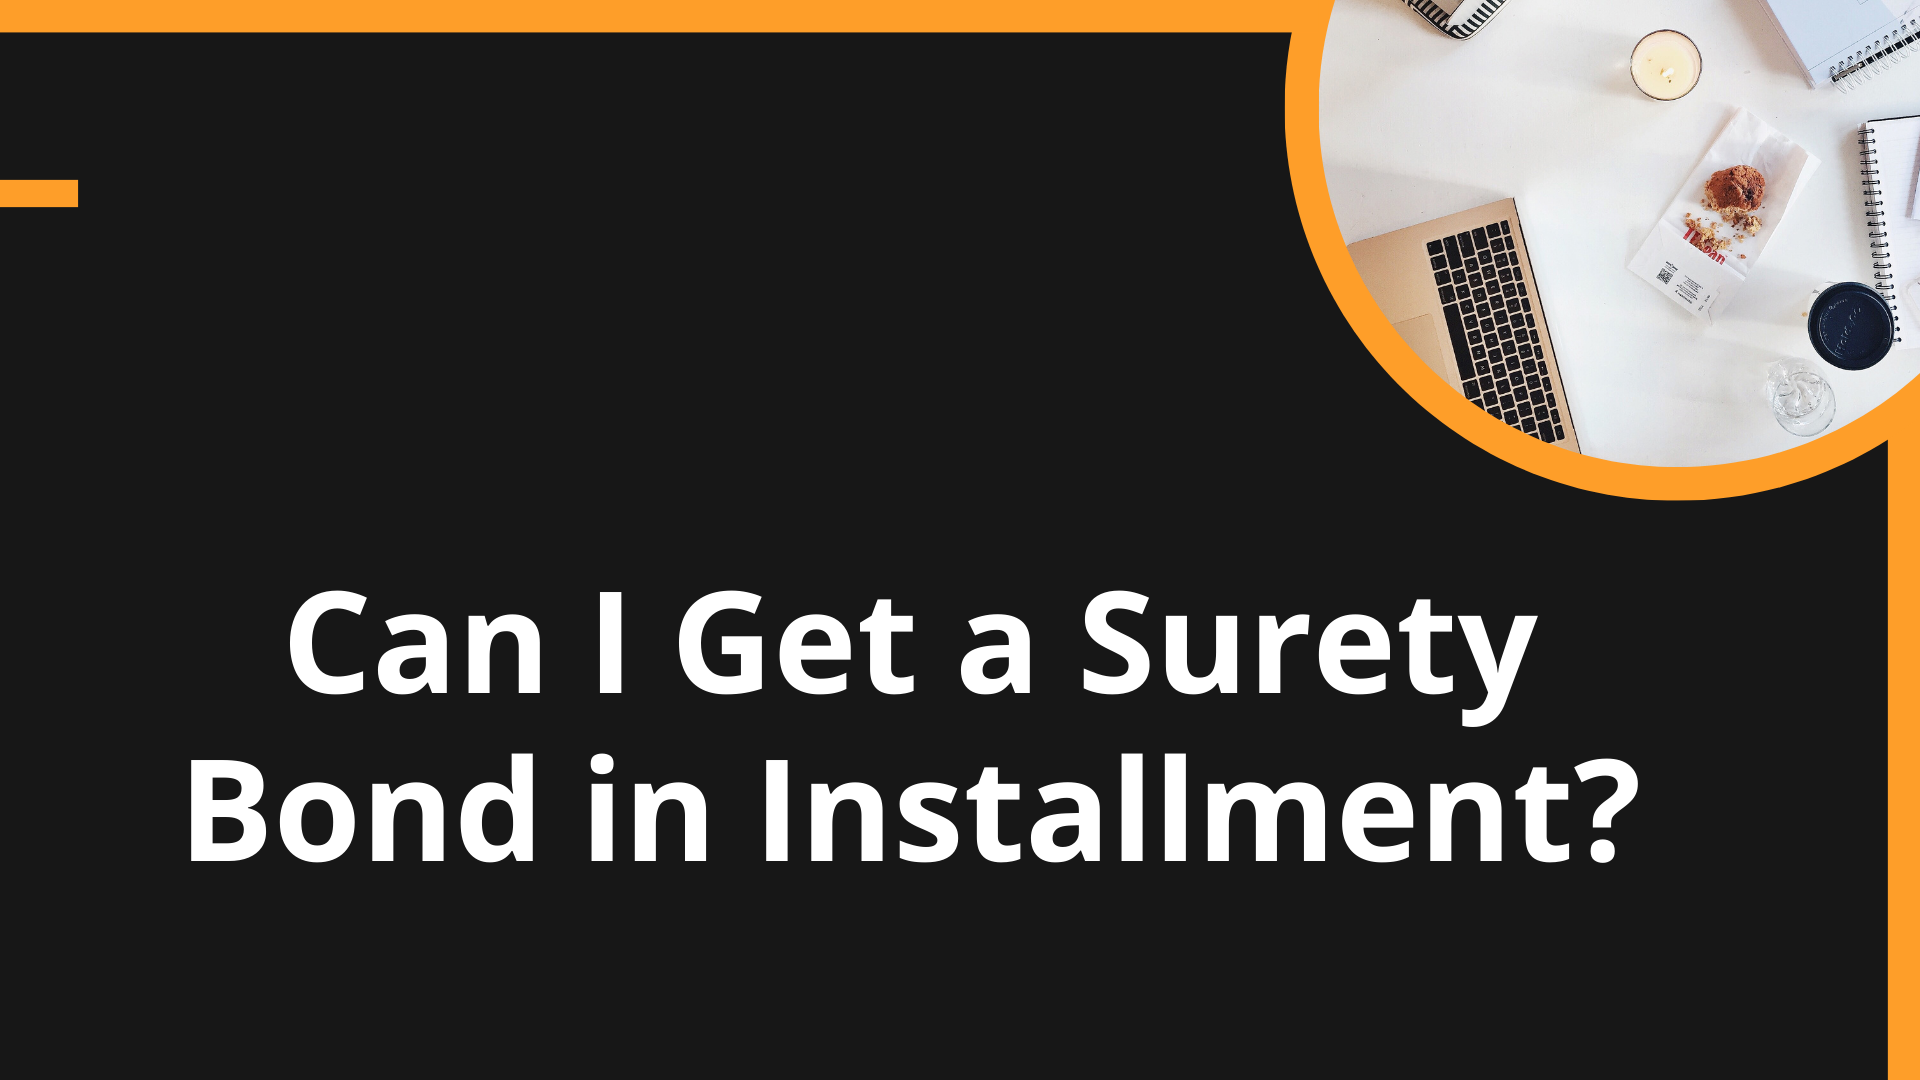 surety bond - Can you work out an installment payment plan with the issuer - desktop